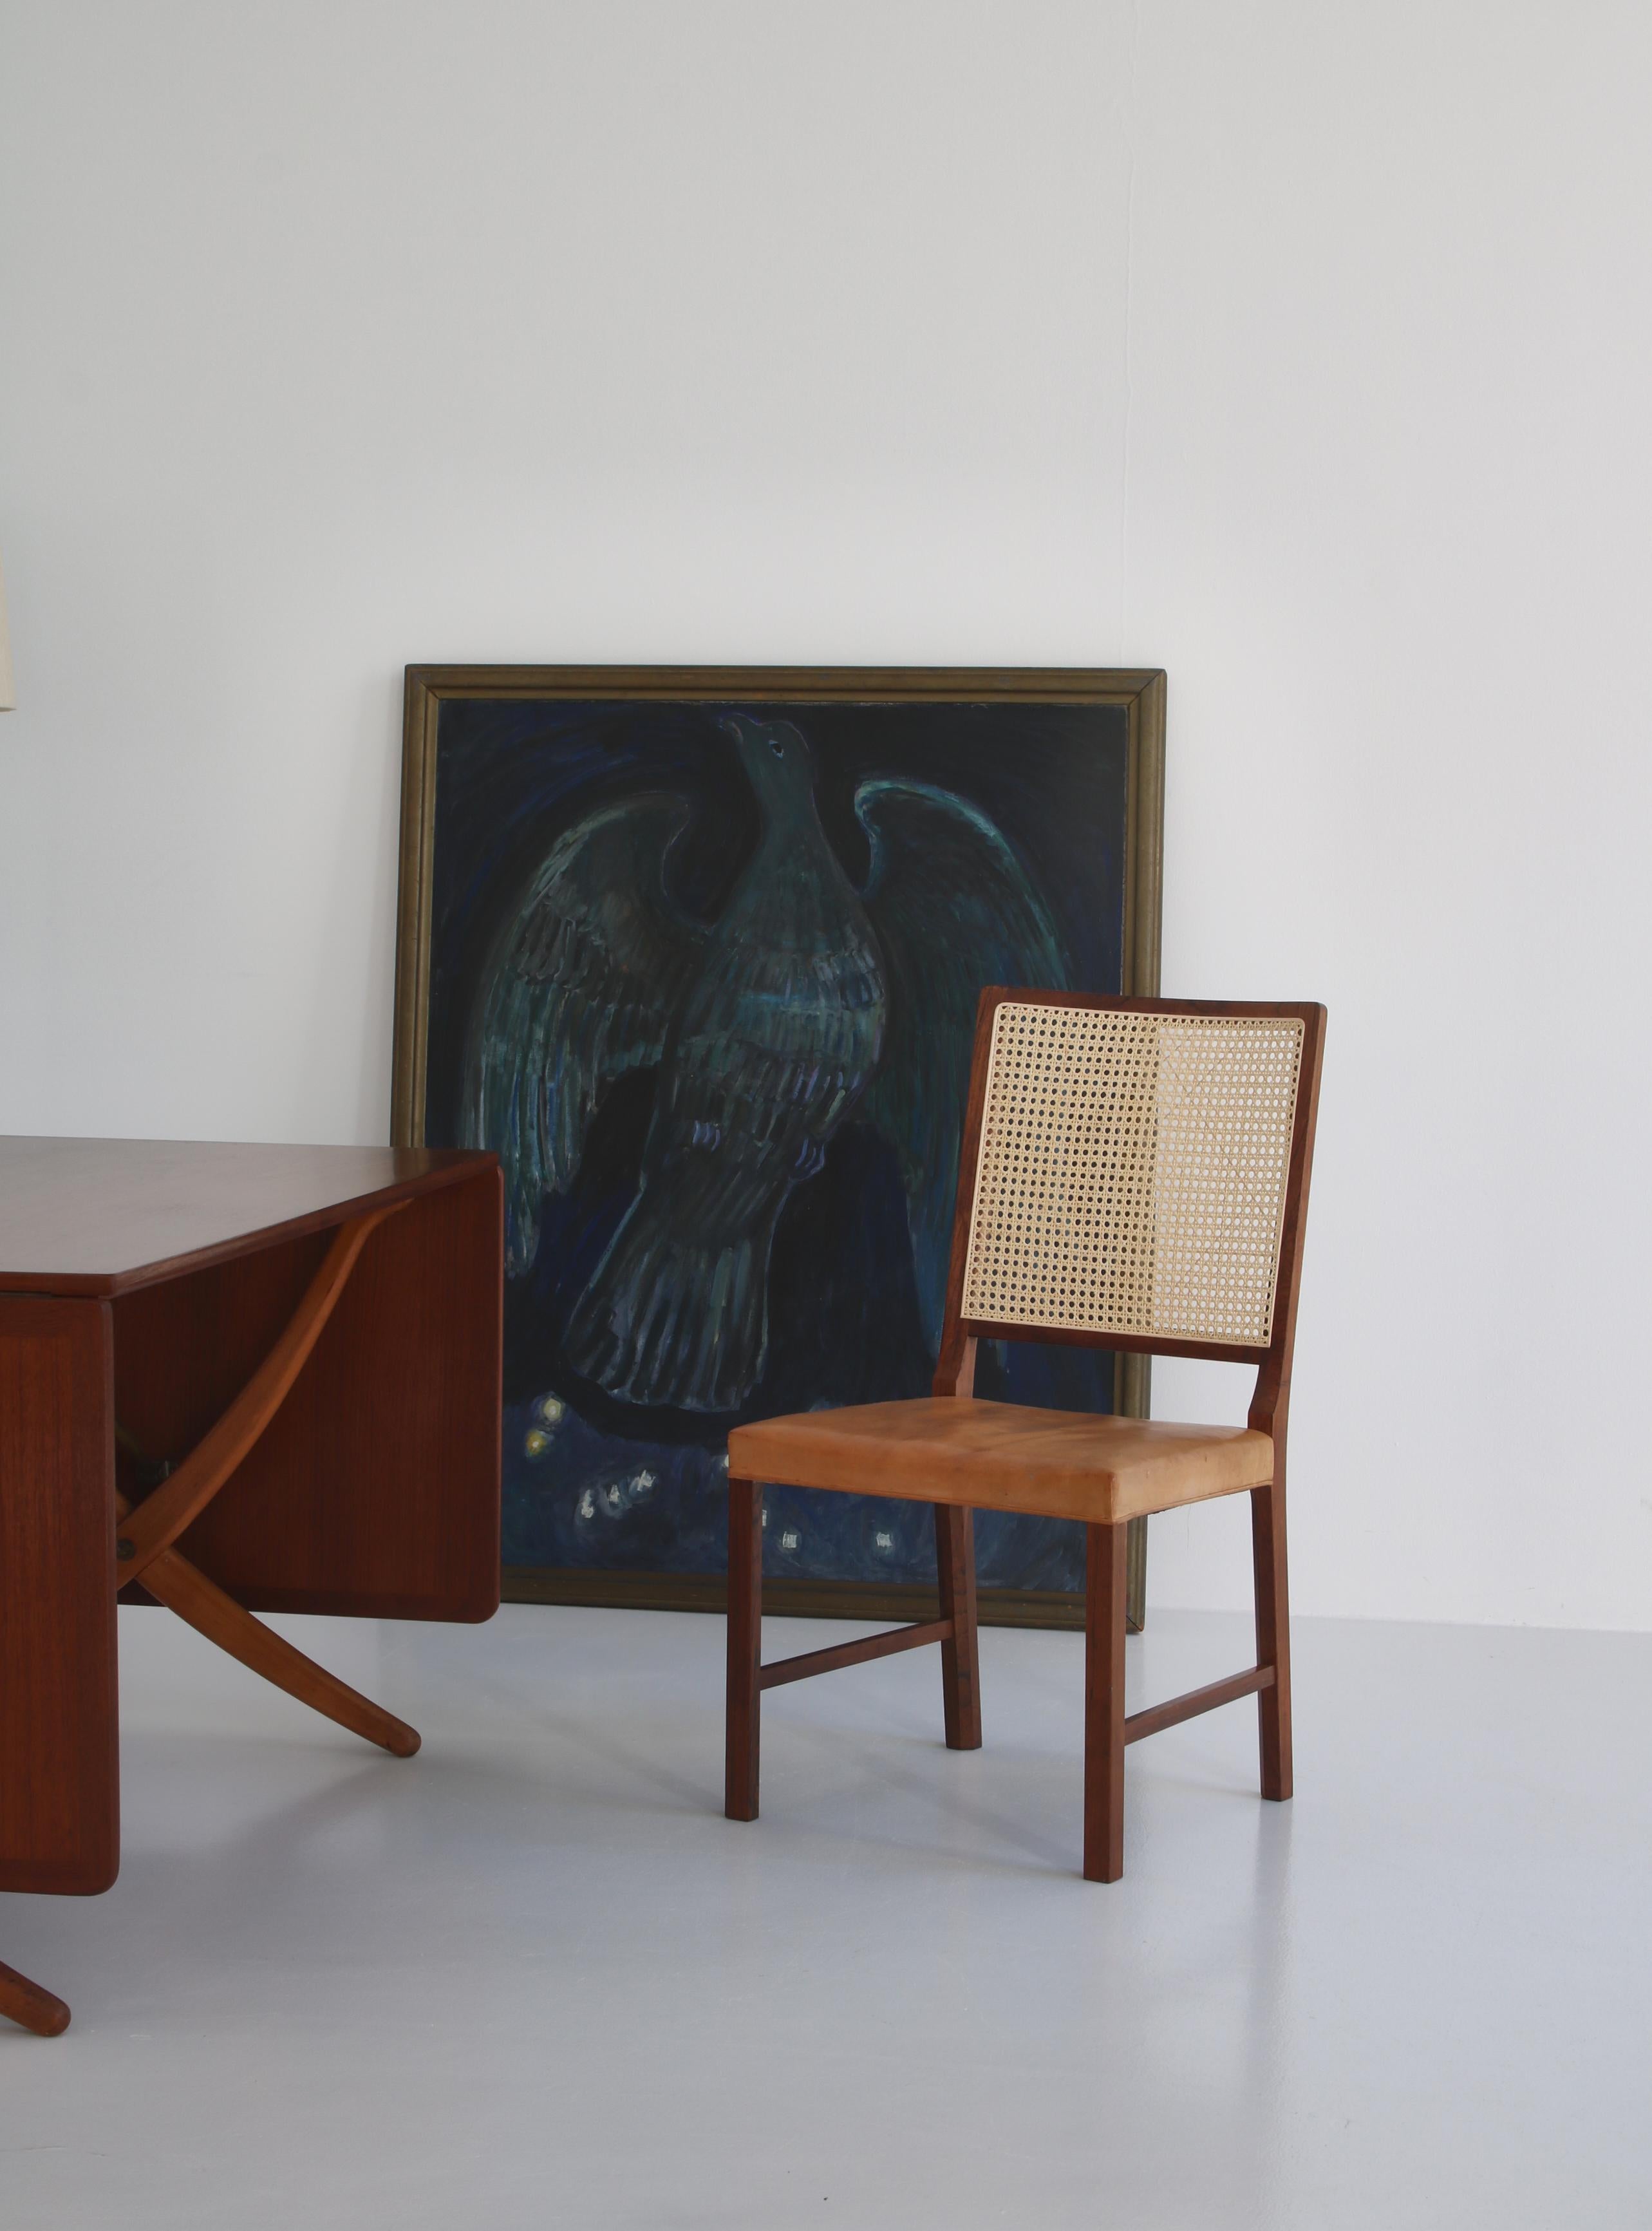 Elegant Danish Modern chair made by cabinetmaker Holger Nissen in the 1960s in his workshop in Denmark. The chair is made from solid rosewood with an amazing grain and the seat is upholstered in the original natural leather that has patinated evenly